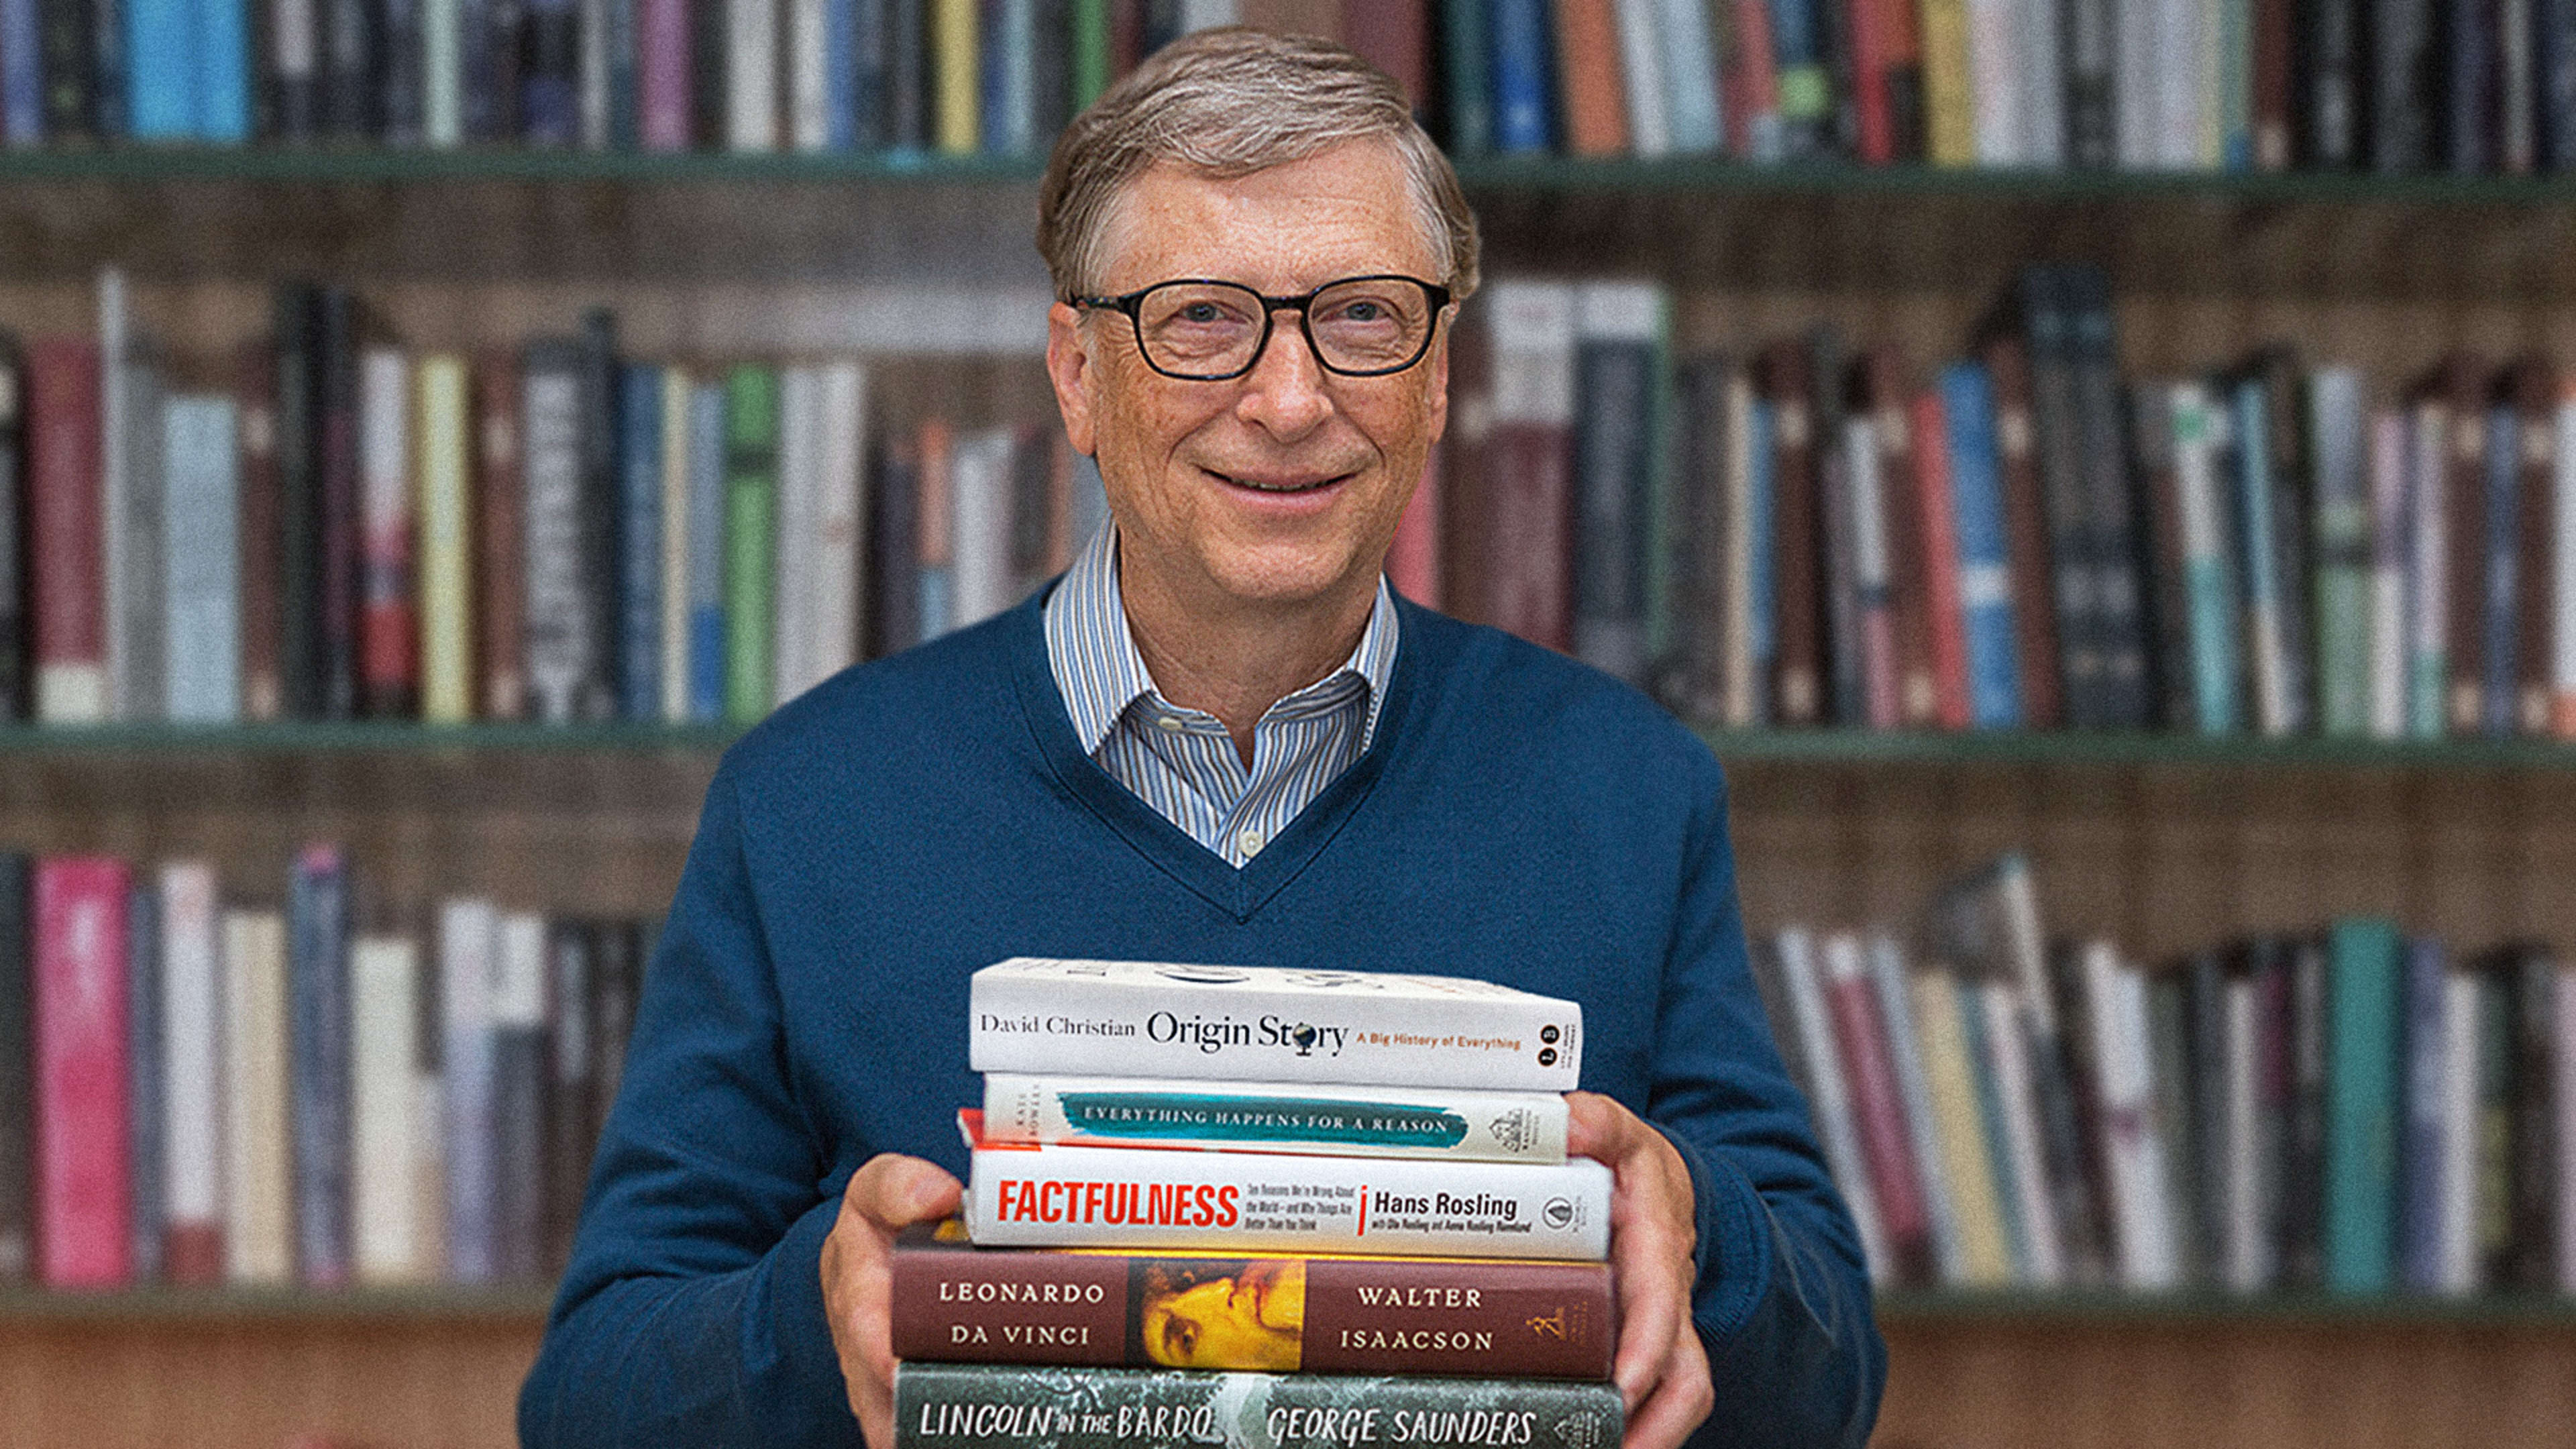 These are the books Bill Gates says to read this summer